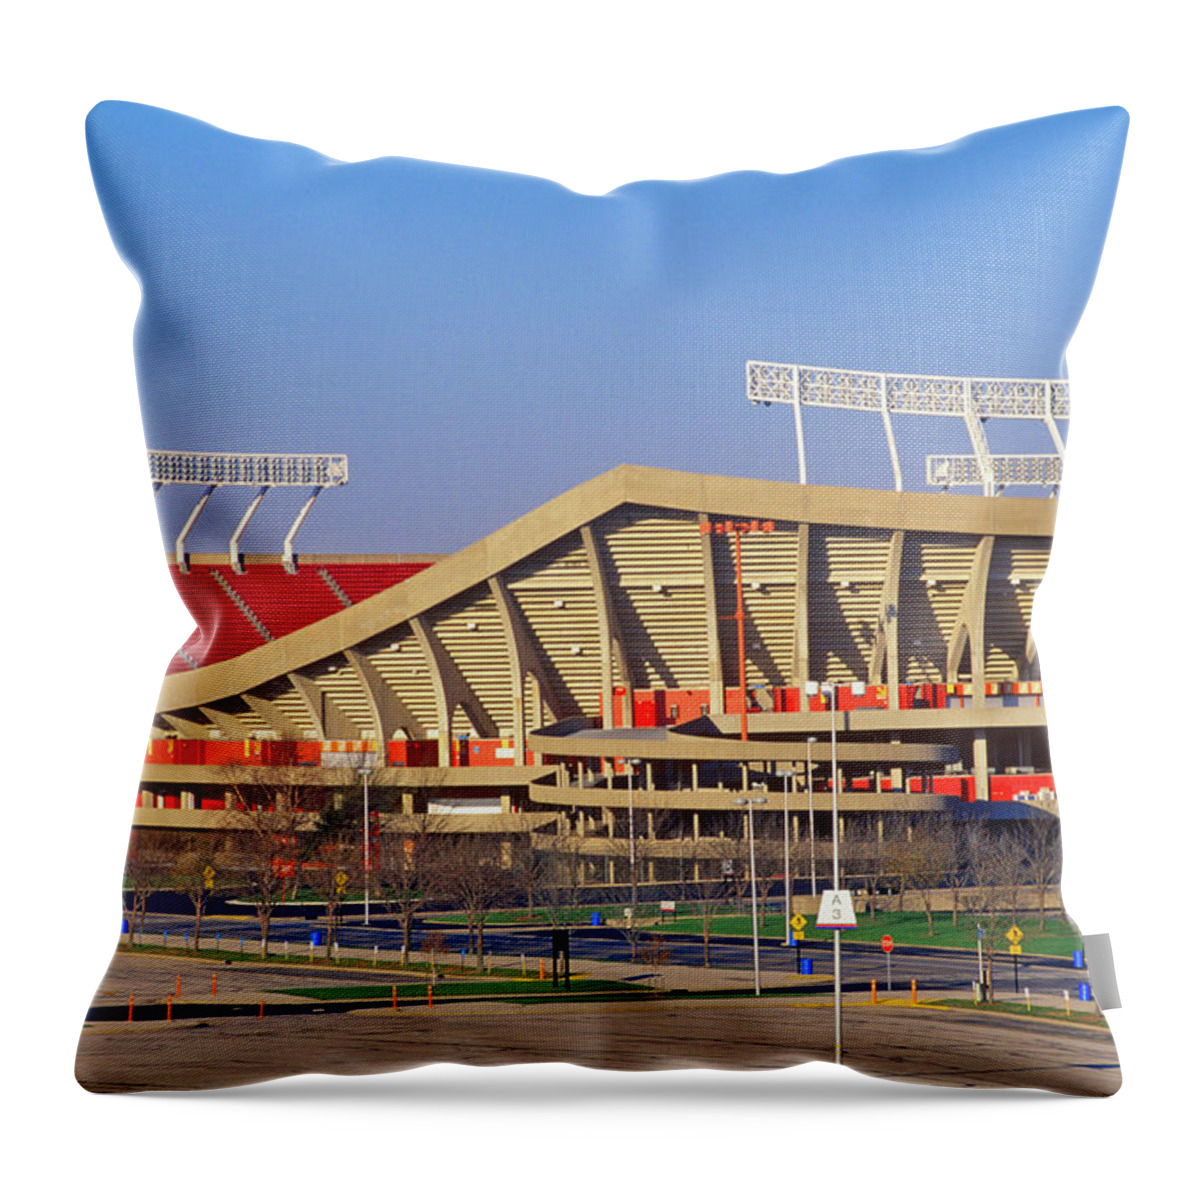 Photography Throw Pillow featuring the photograph Arrowhead Stadium, Home Of The Kansas #1 by Panoramic Images